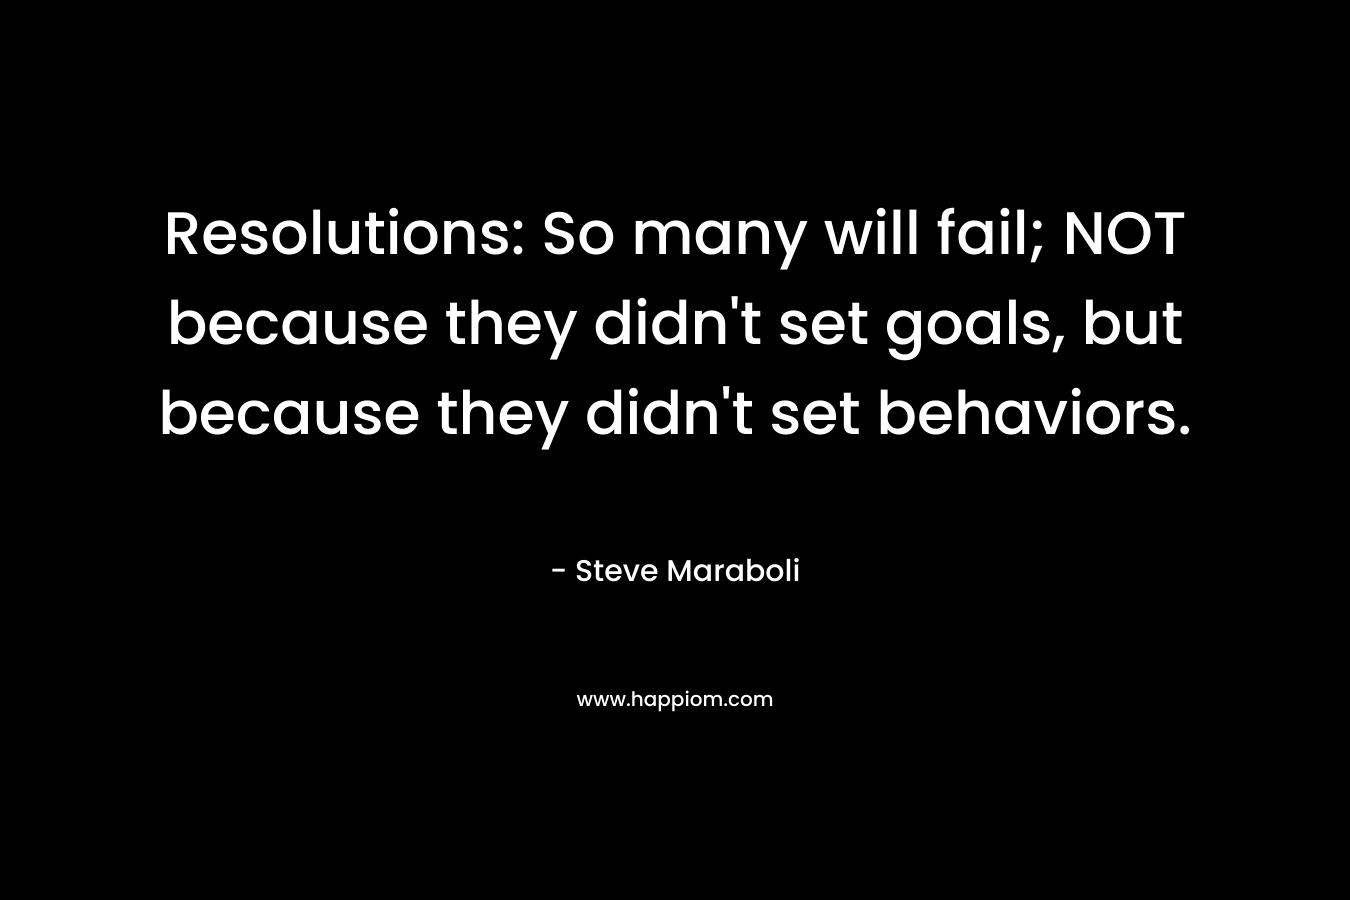 Resolutions: So many will fail; NOT because they didn't set goals, but because they didn't set behaviors.